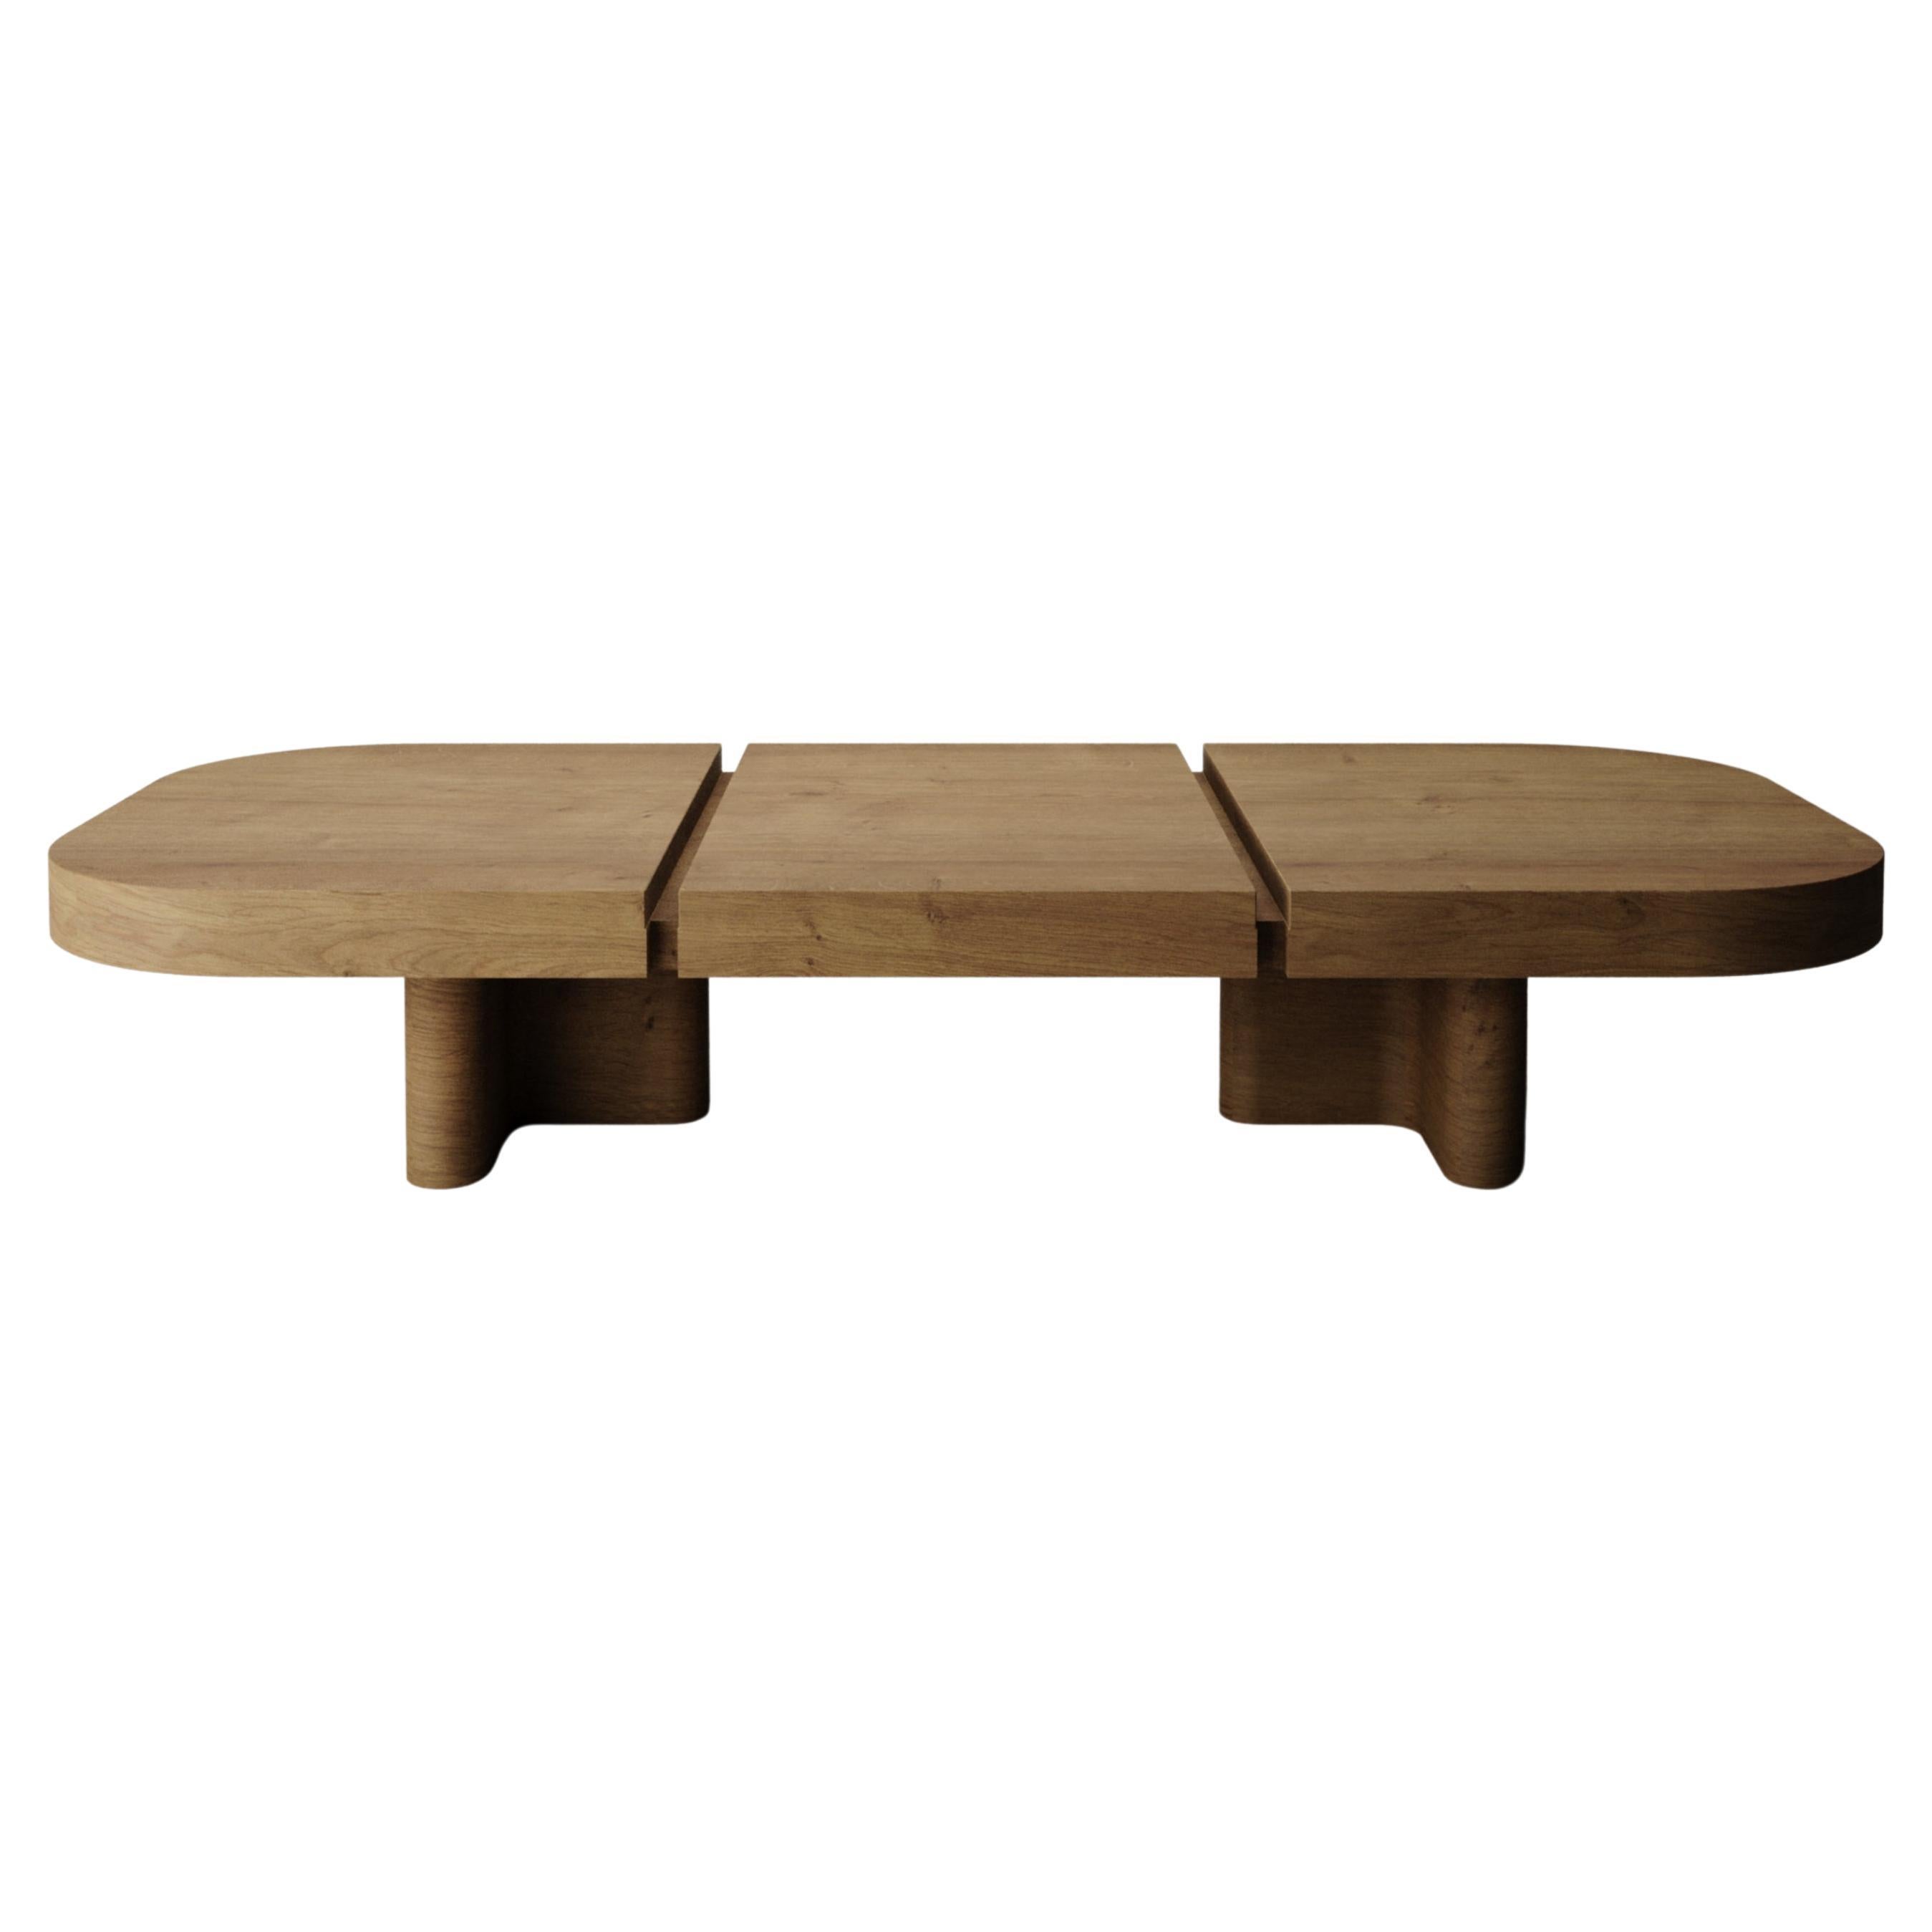 Collector -Designed by Studio Rig Meco Center Table Smoke Oak